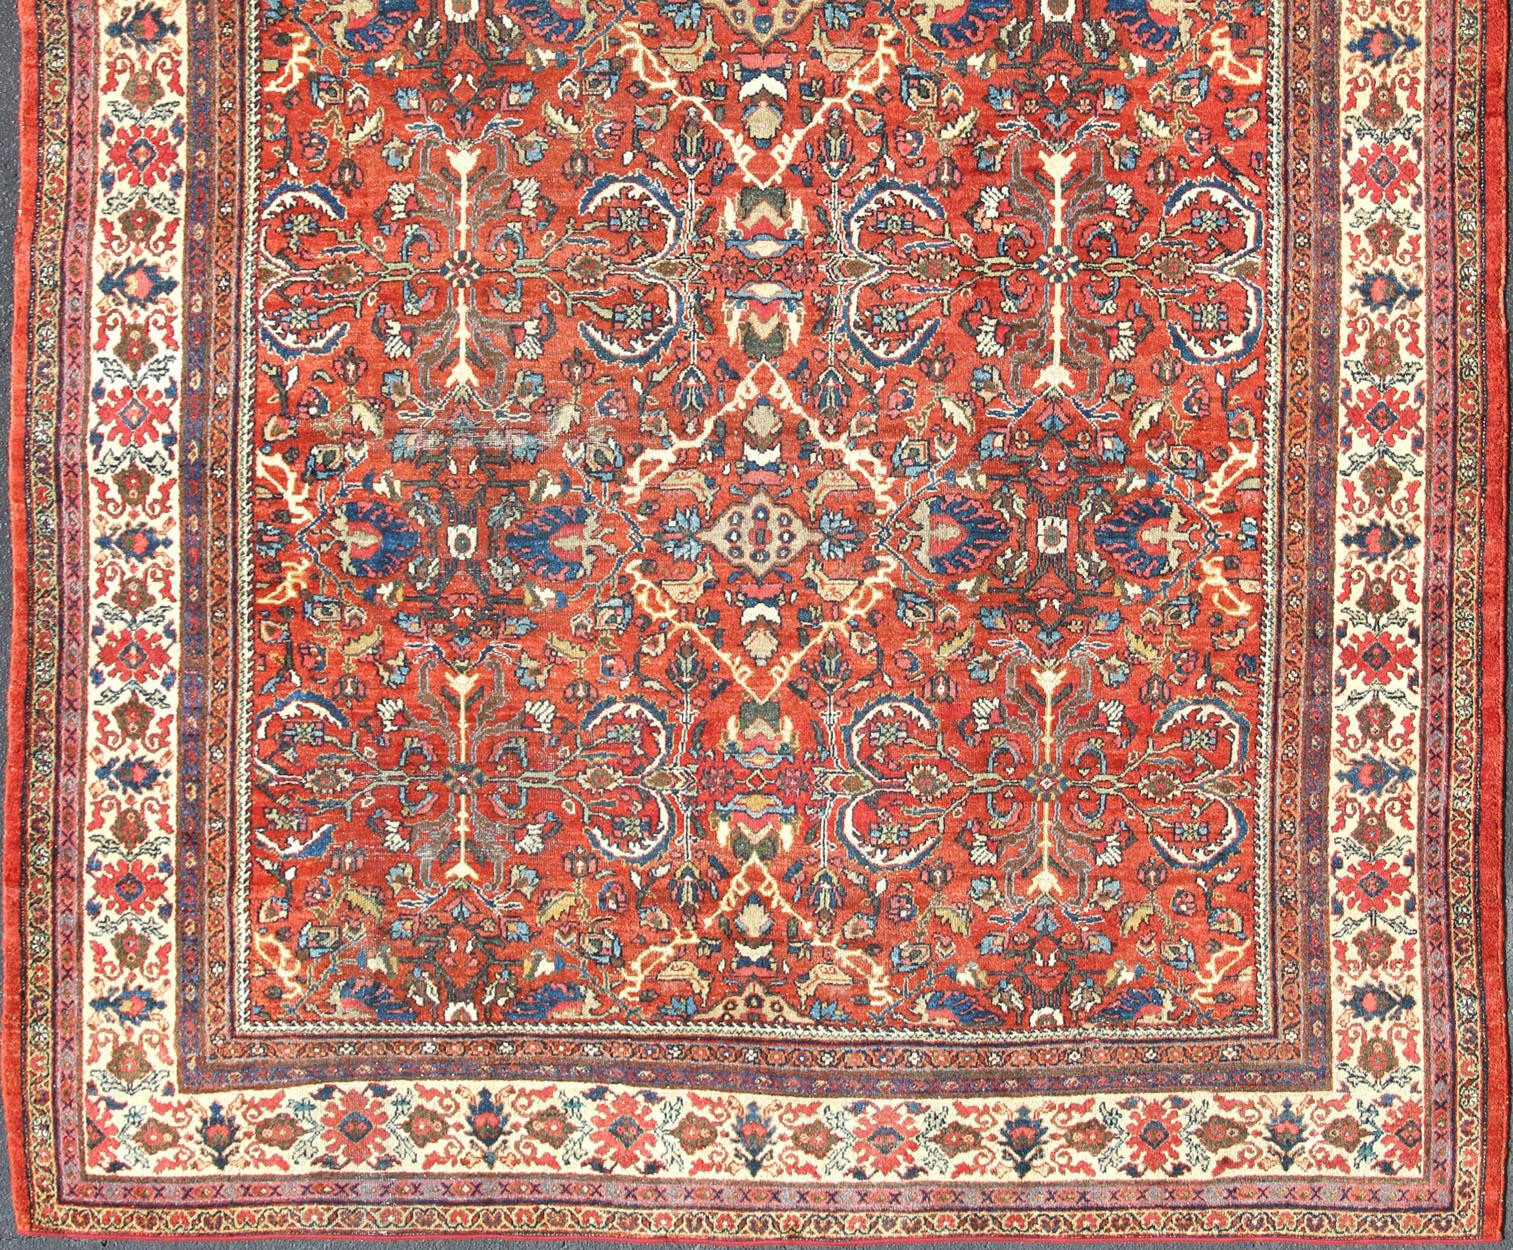 Large Geometric Antique Persian Mahal-Sultanabad Colorful Rug in Soft Rust Red In Good Condition For Sale In Atlanta, GA